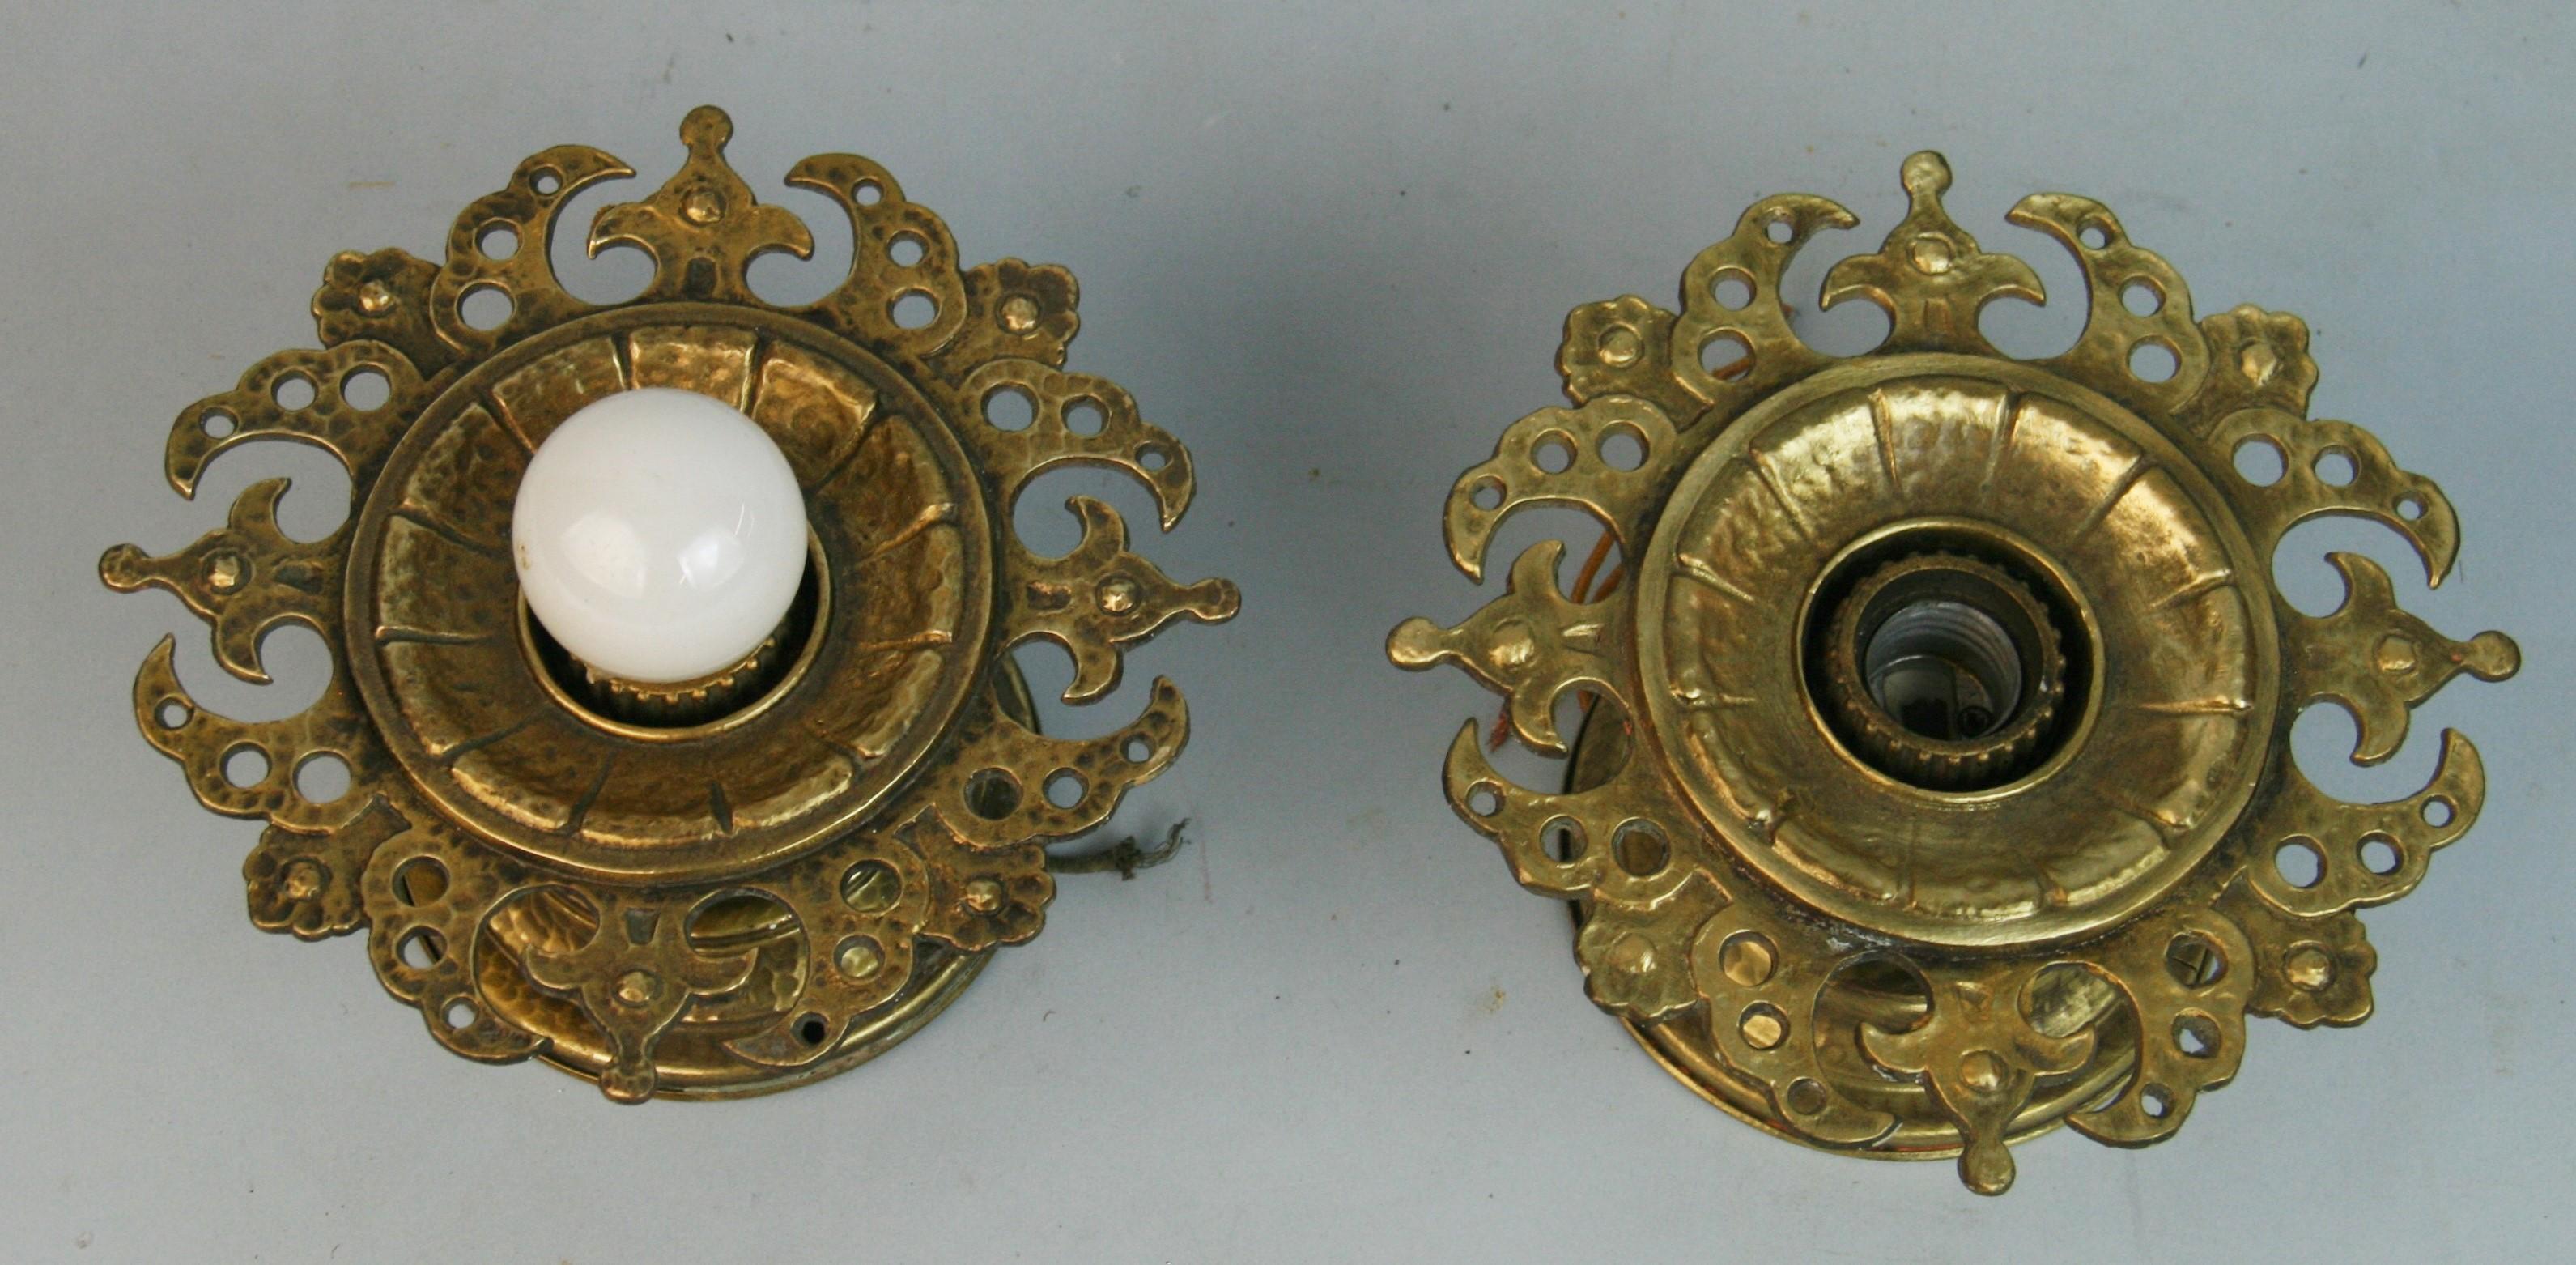 1450 Pair Starburst sconces/ceiling lights
4 pair available